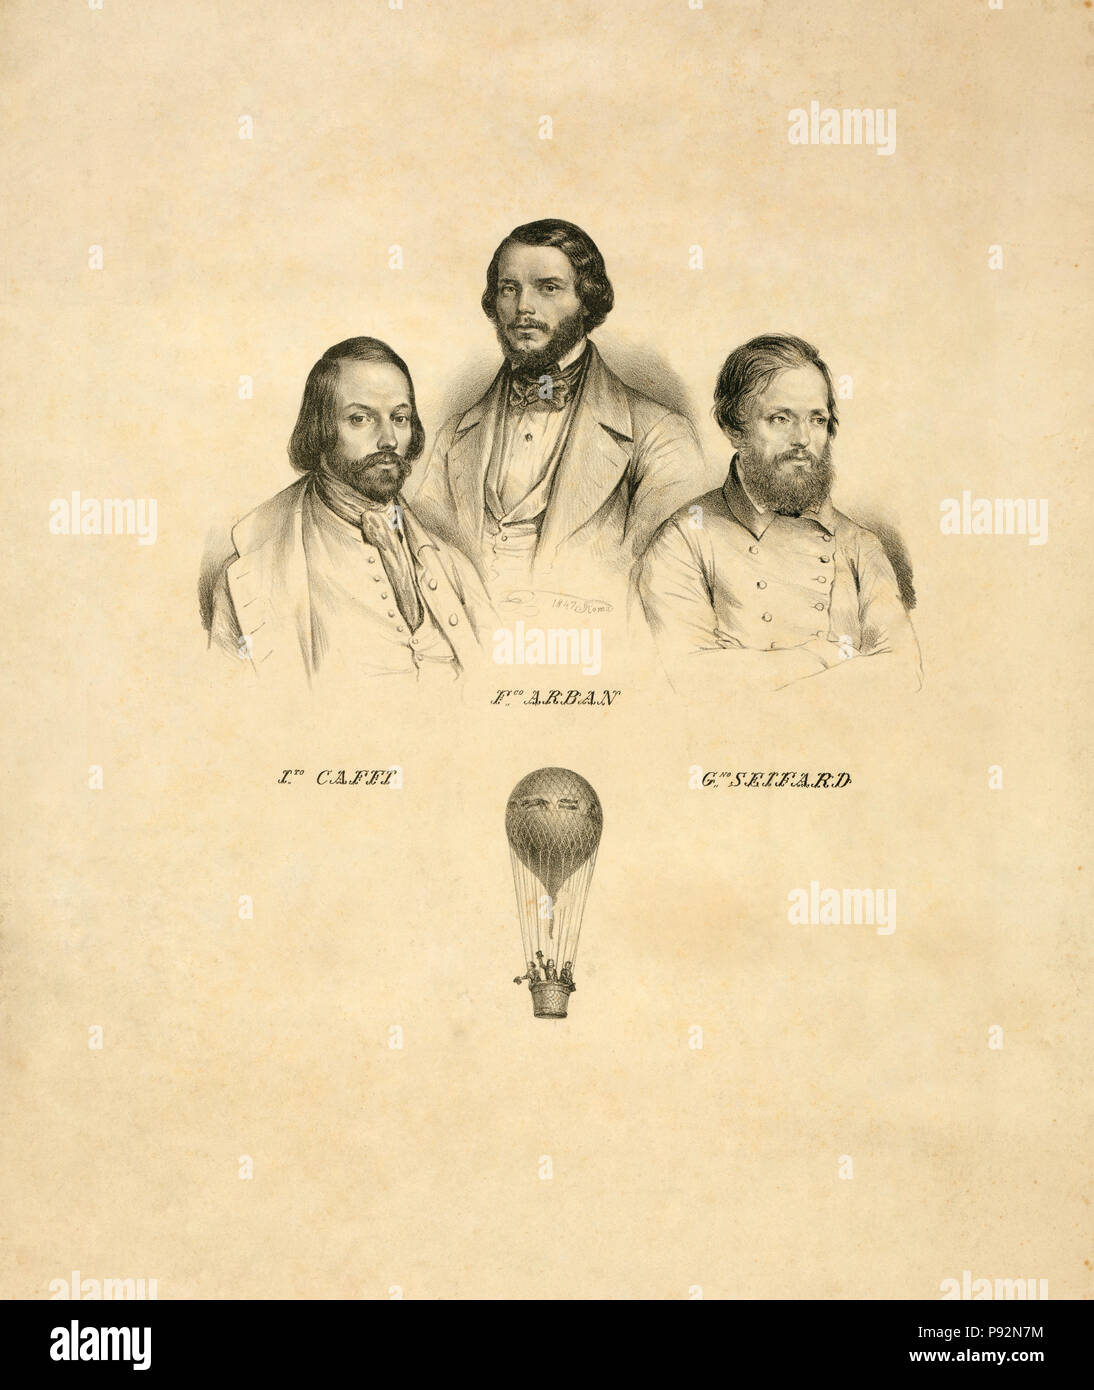 Portraits of three balloonists Ippolito Caffi, Francesco Arban, and G. Seiffard, with a small view of them in an ascending balloon 1847 Stock Photo